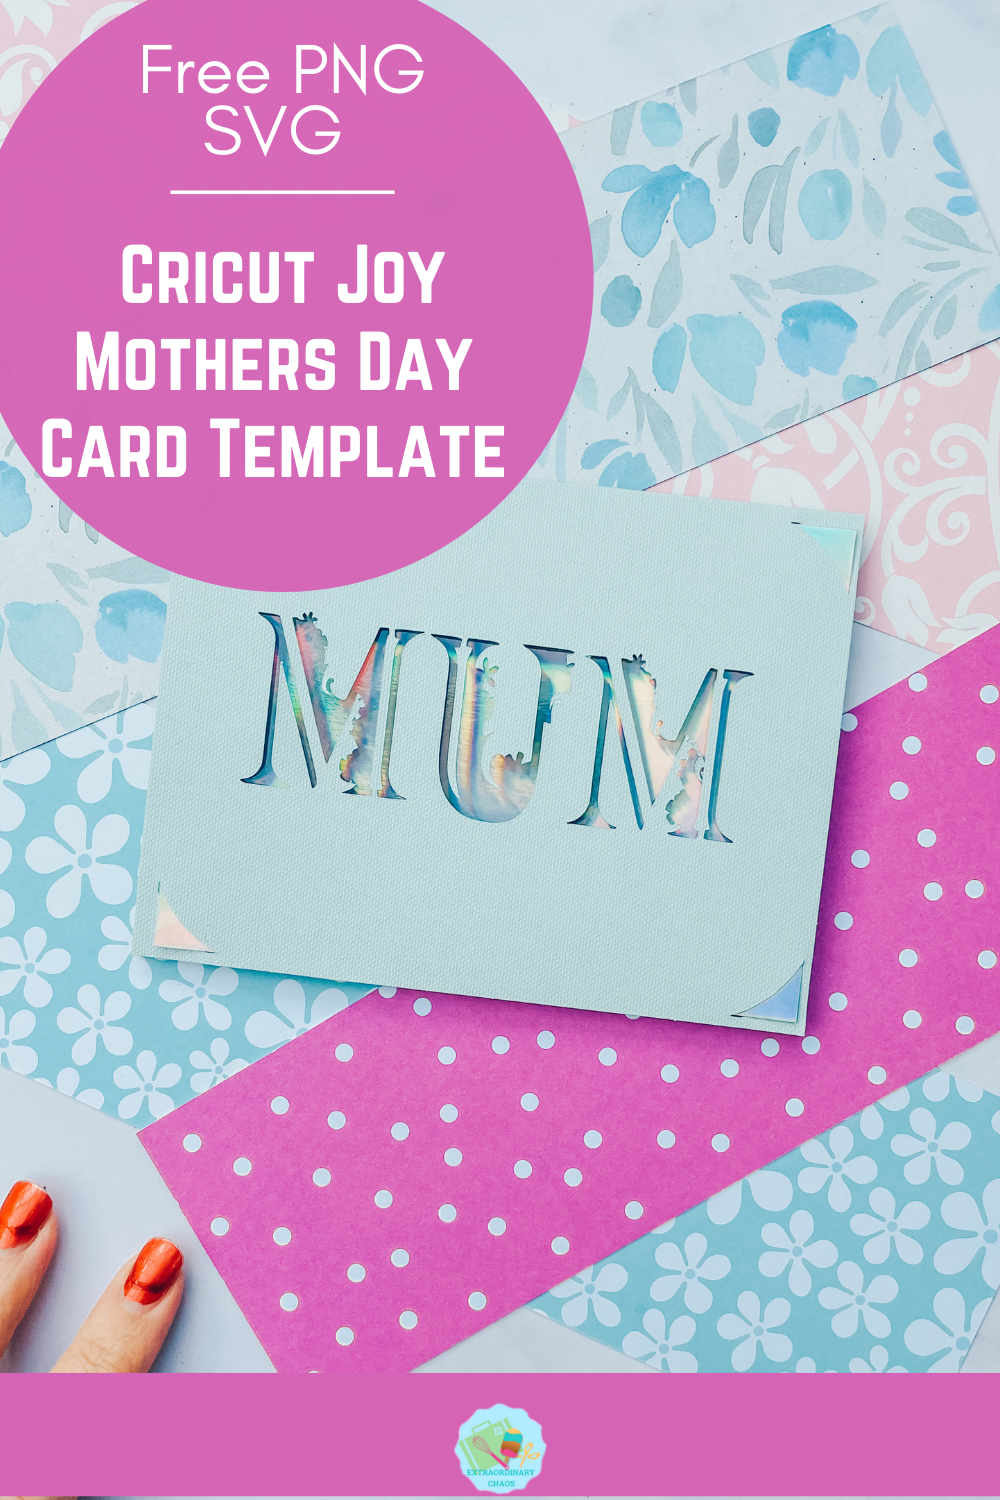 Free PNG SVG Mothers Day Card Template